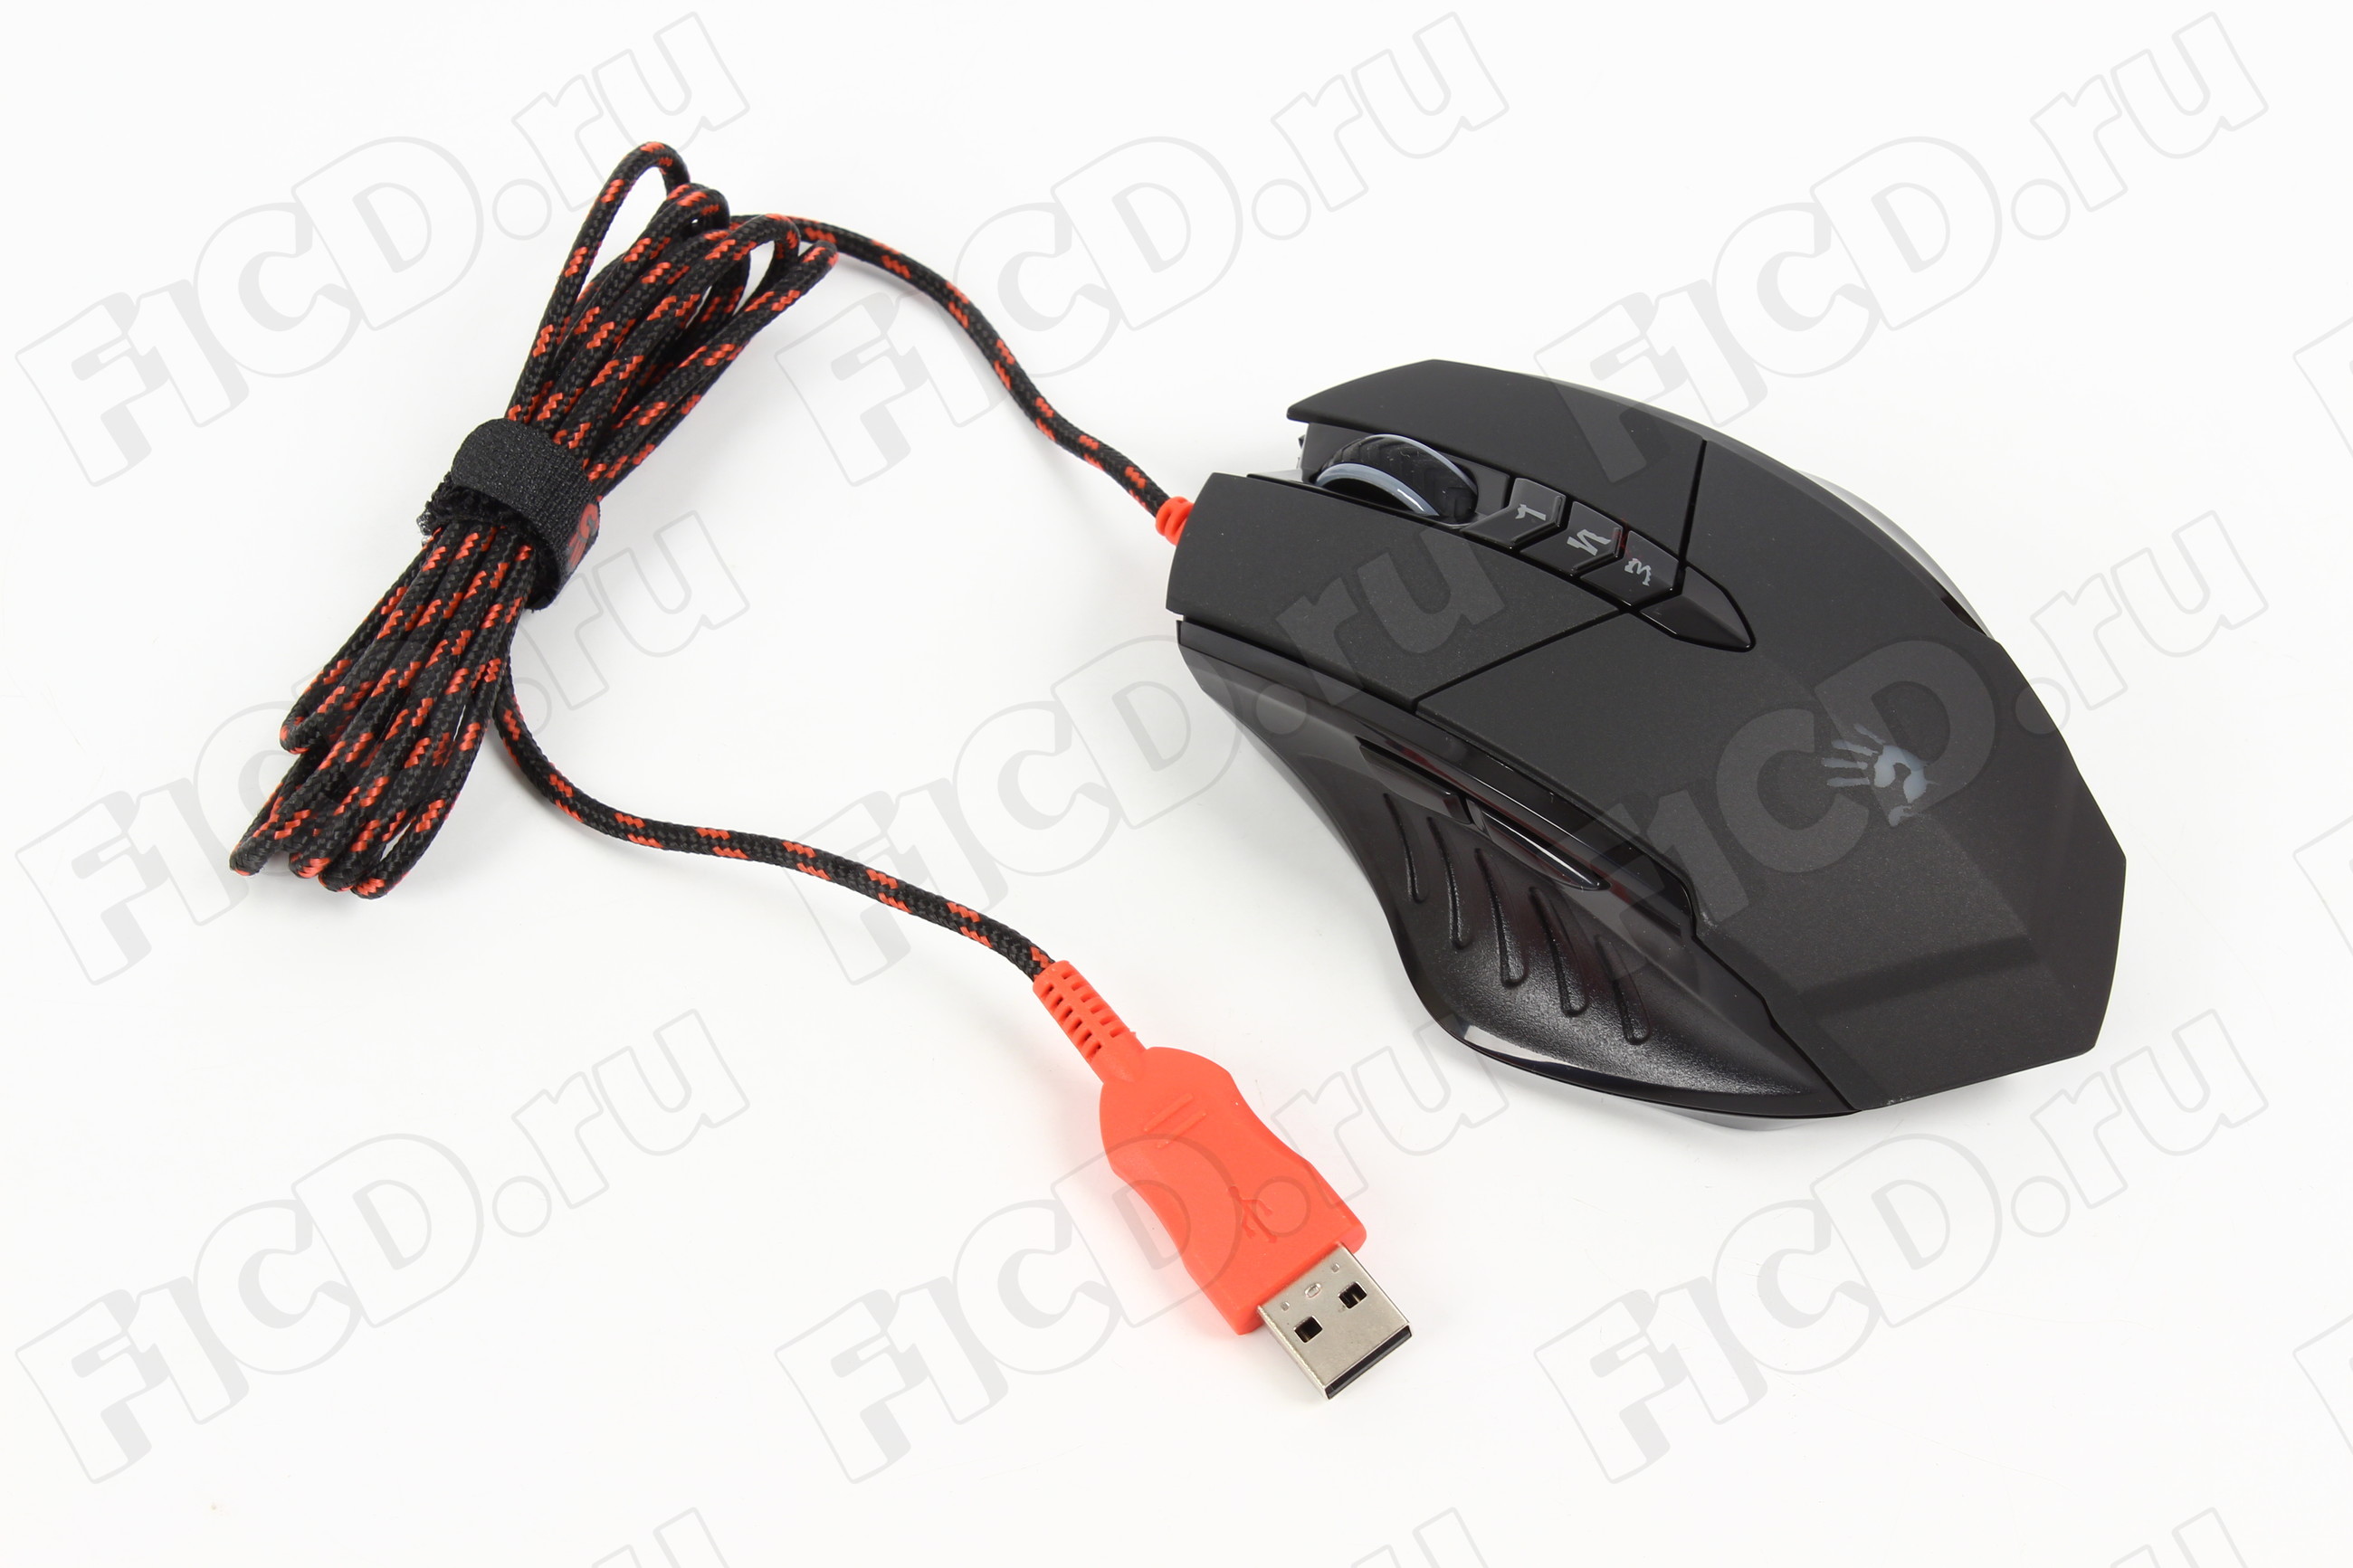 Bloody mouse a4tech rust обход фото 50